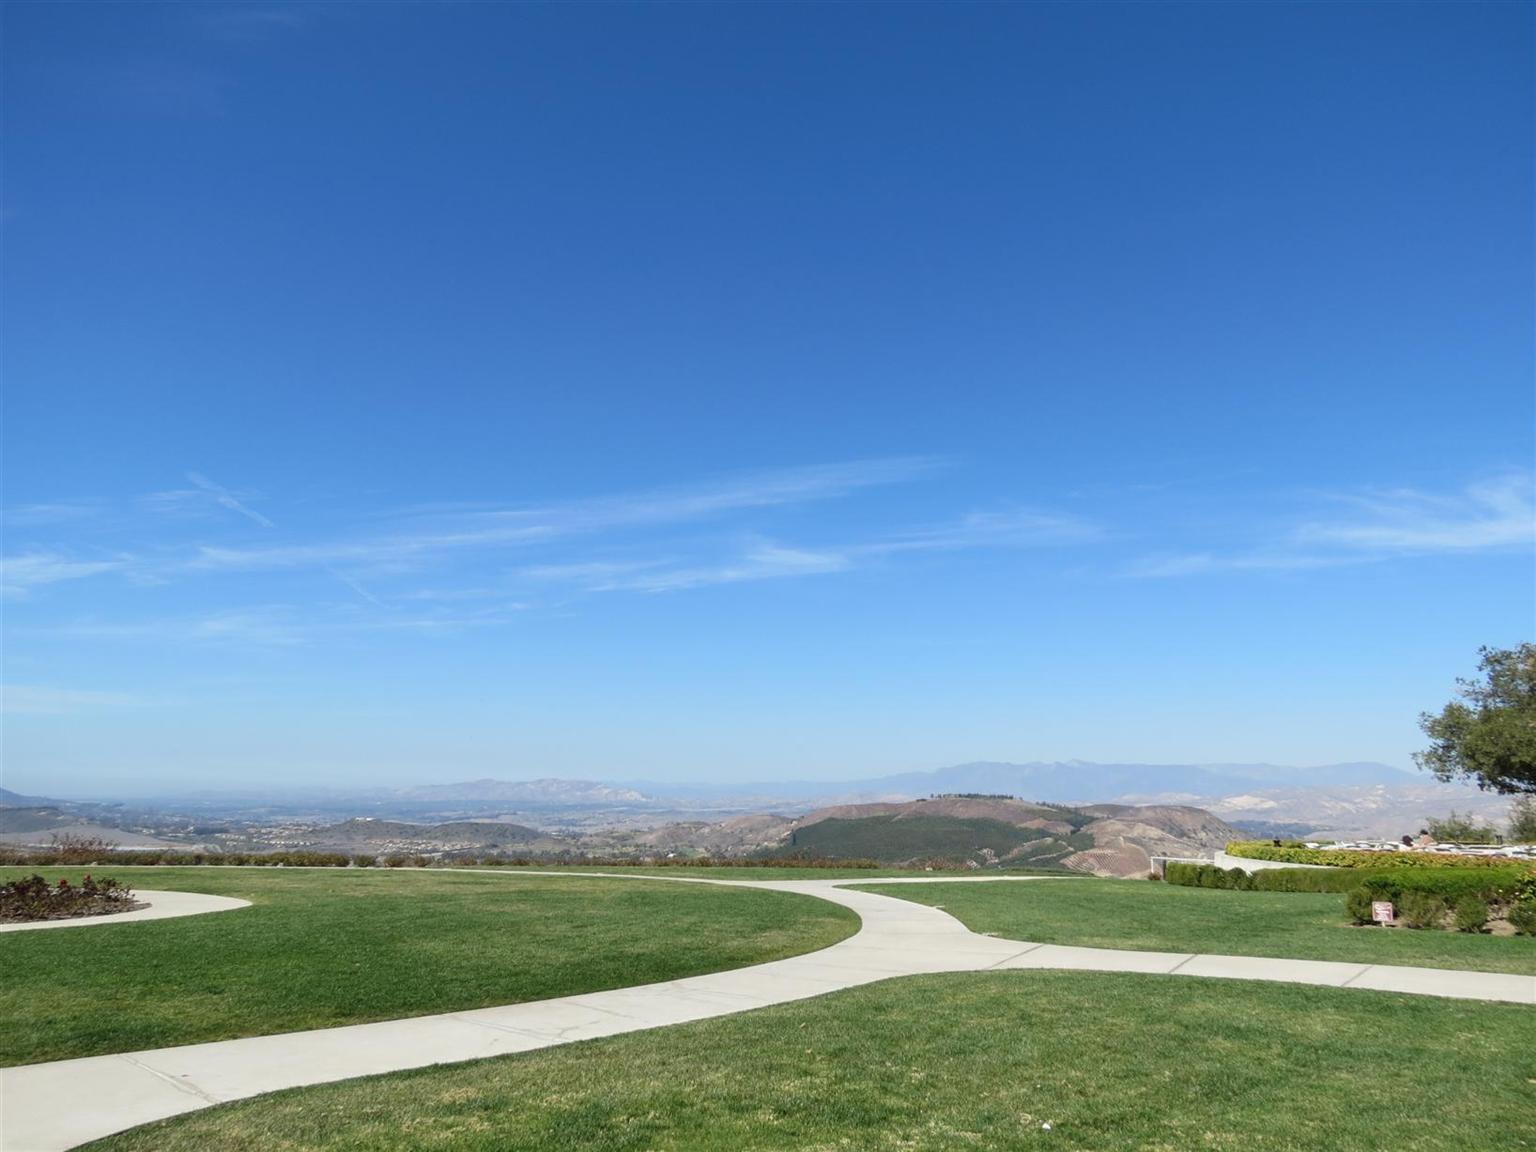 View from President Reagan Library in Simi Valley, California